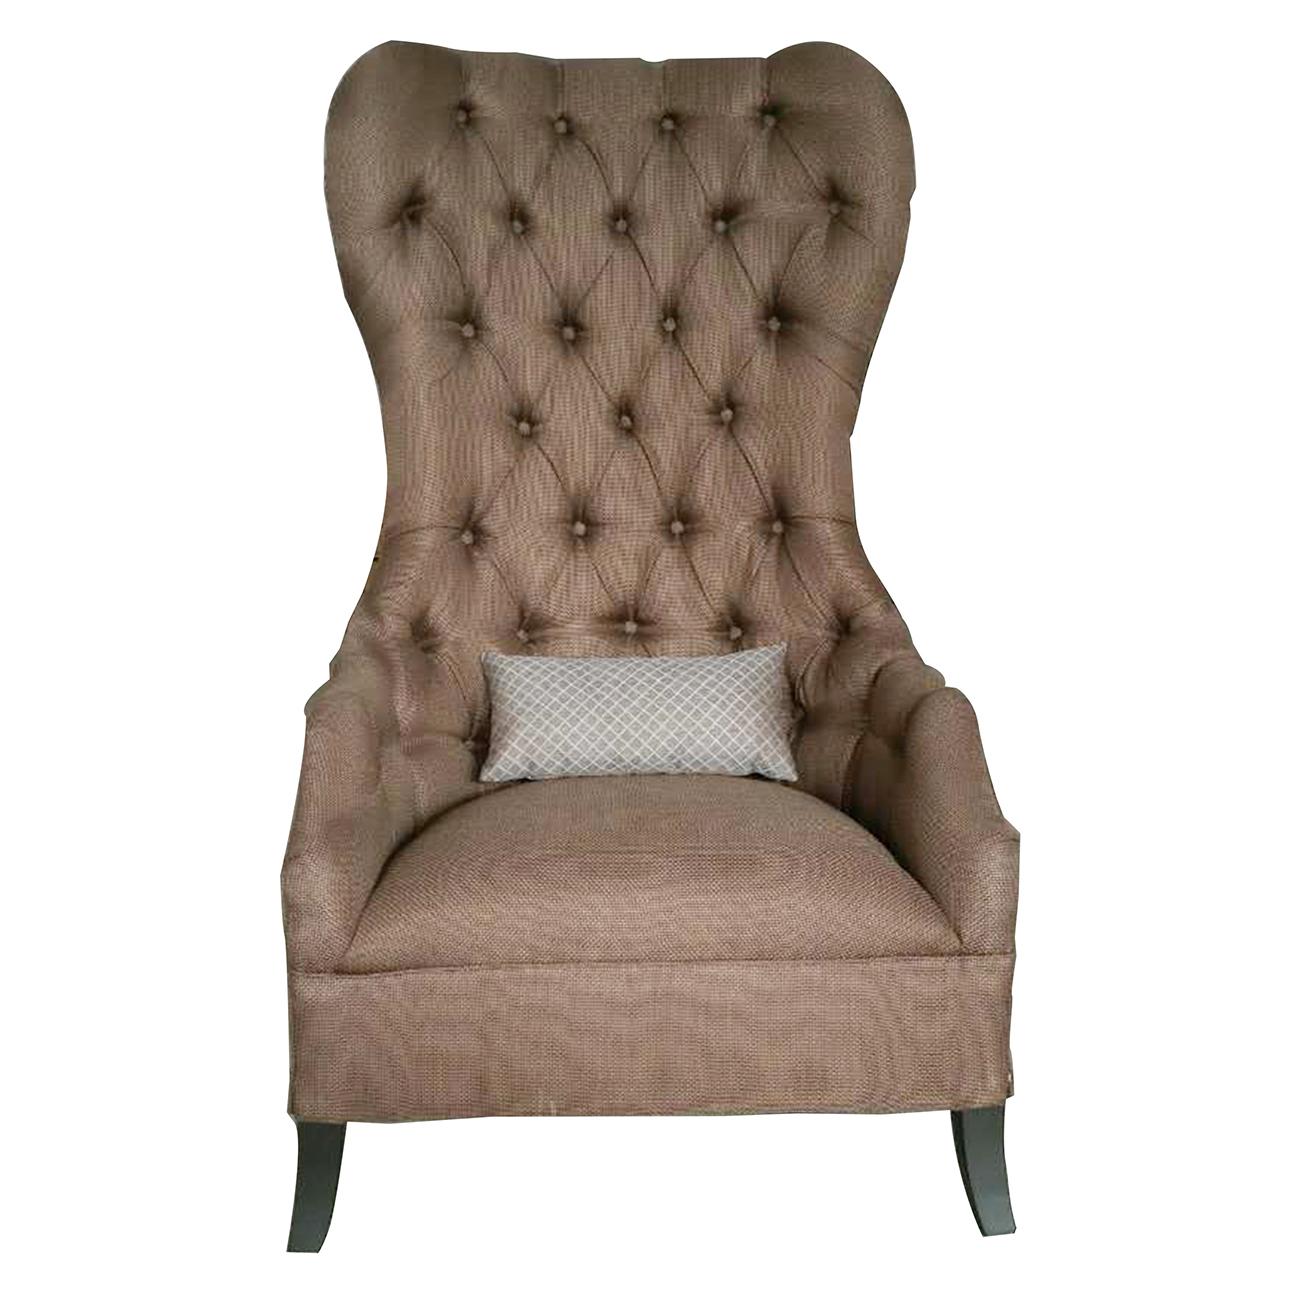 Traditional Arm Chairs 40958 40958-Armchair in Cappuccino Polyester